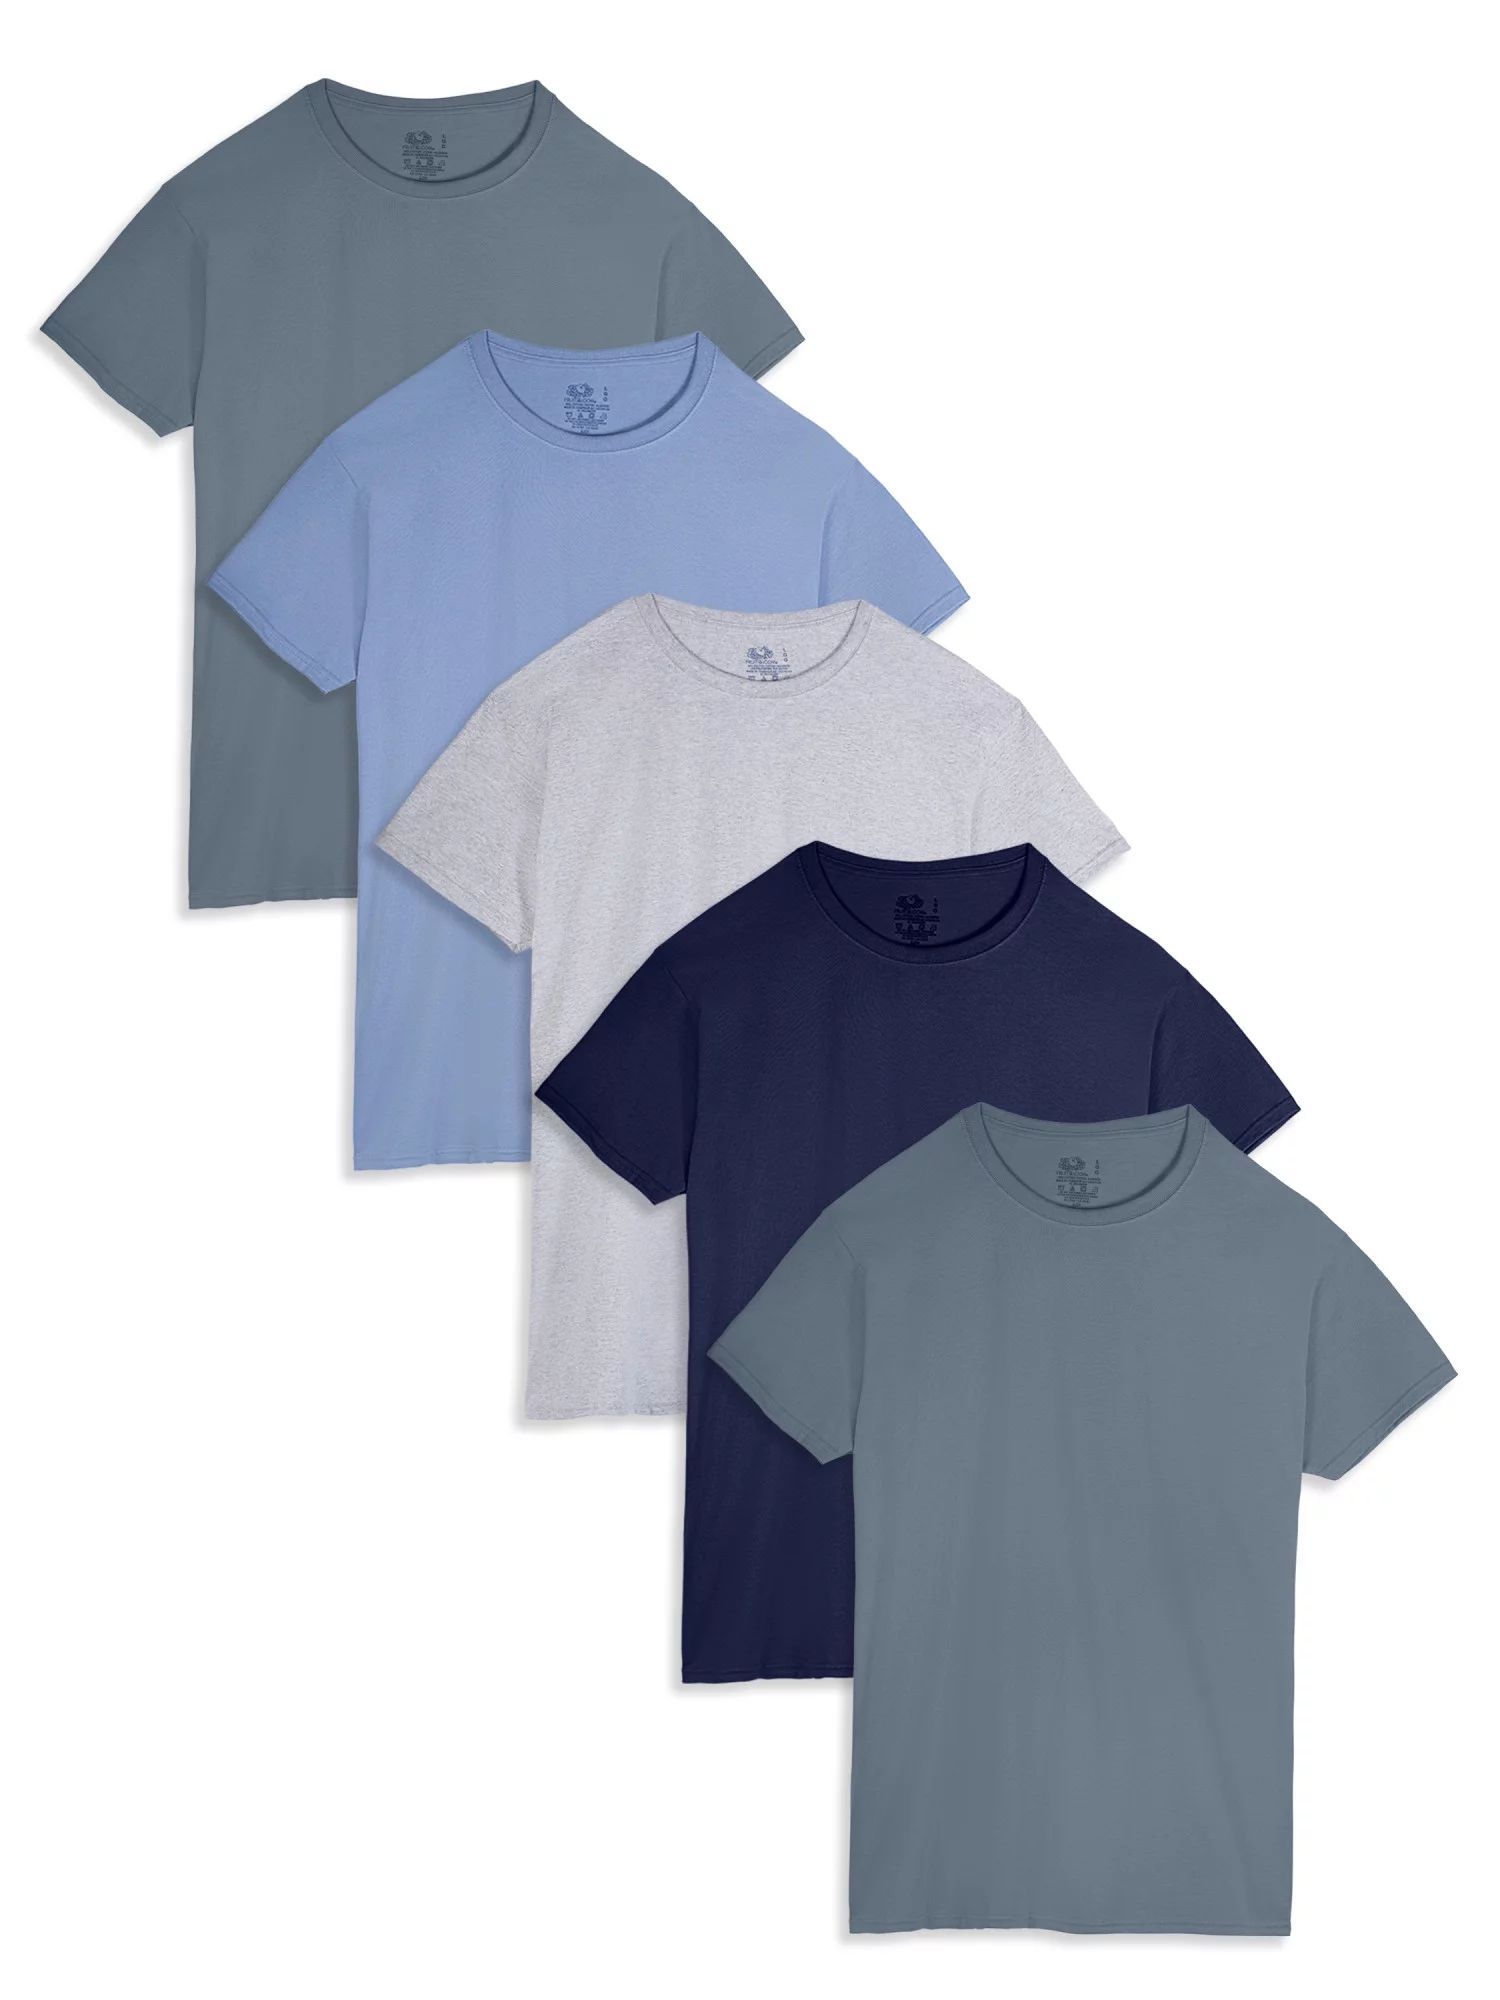 Fruit of the Loom Men's Short Sleeve Assorted Crew T-Shirts, 5 Pack | Walmart (US)